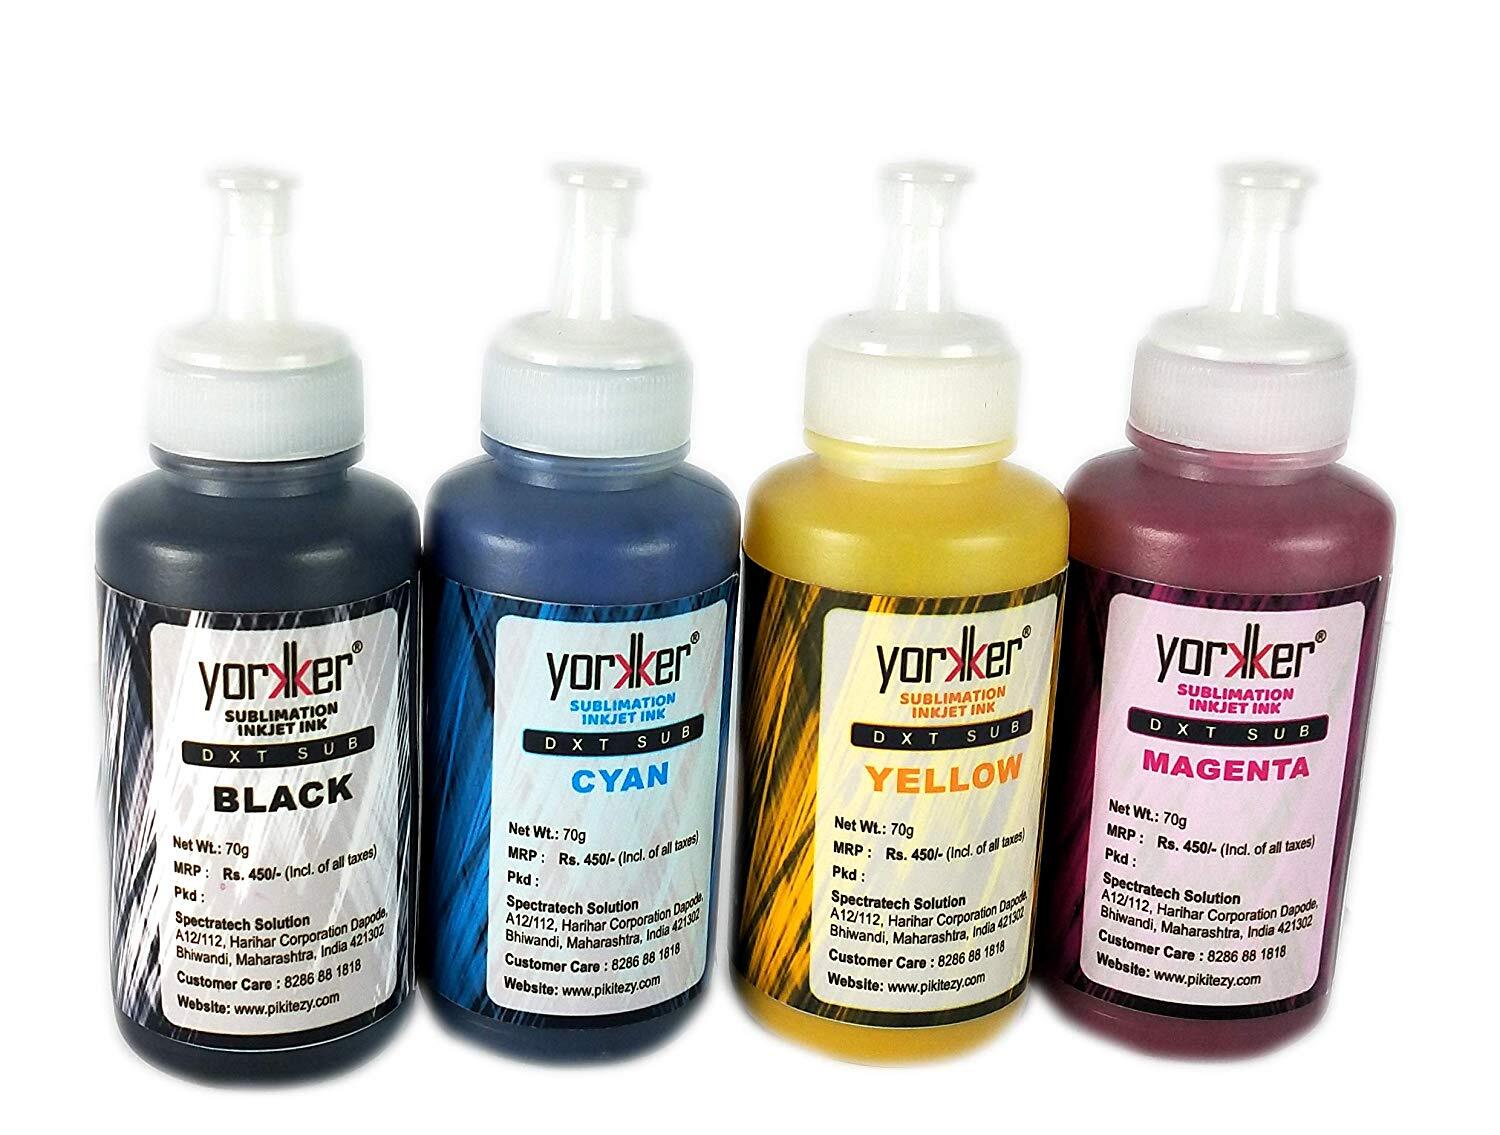 Yorkker Sublimation Ink DXT SUB for Heat Transfer Printing on Mugs